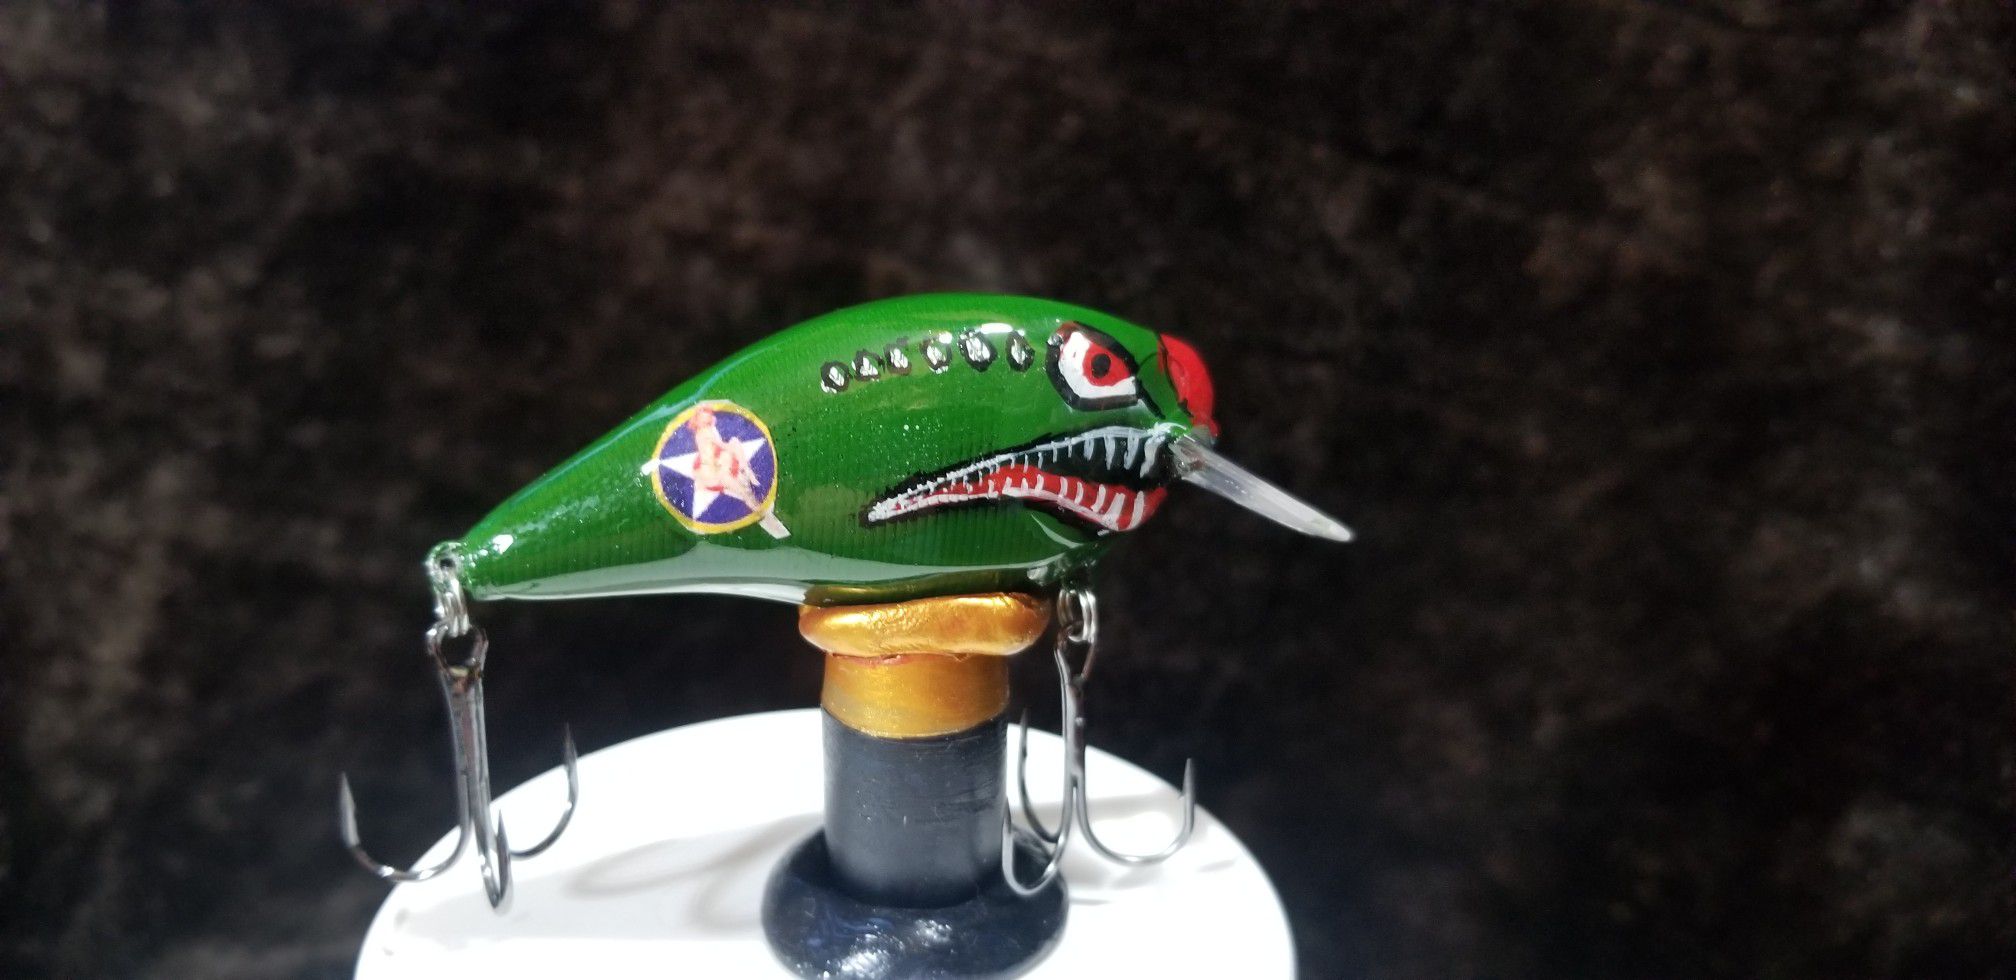 BRAND NEW UNIQUE, CRANK BAIT FISHING LURE! ONE OF A KIND! GREAT GIFT FOR THAT FISHERMAN!